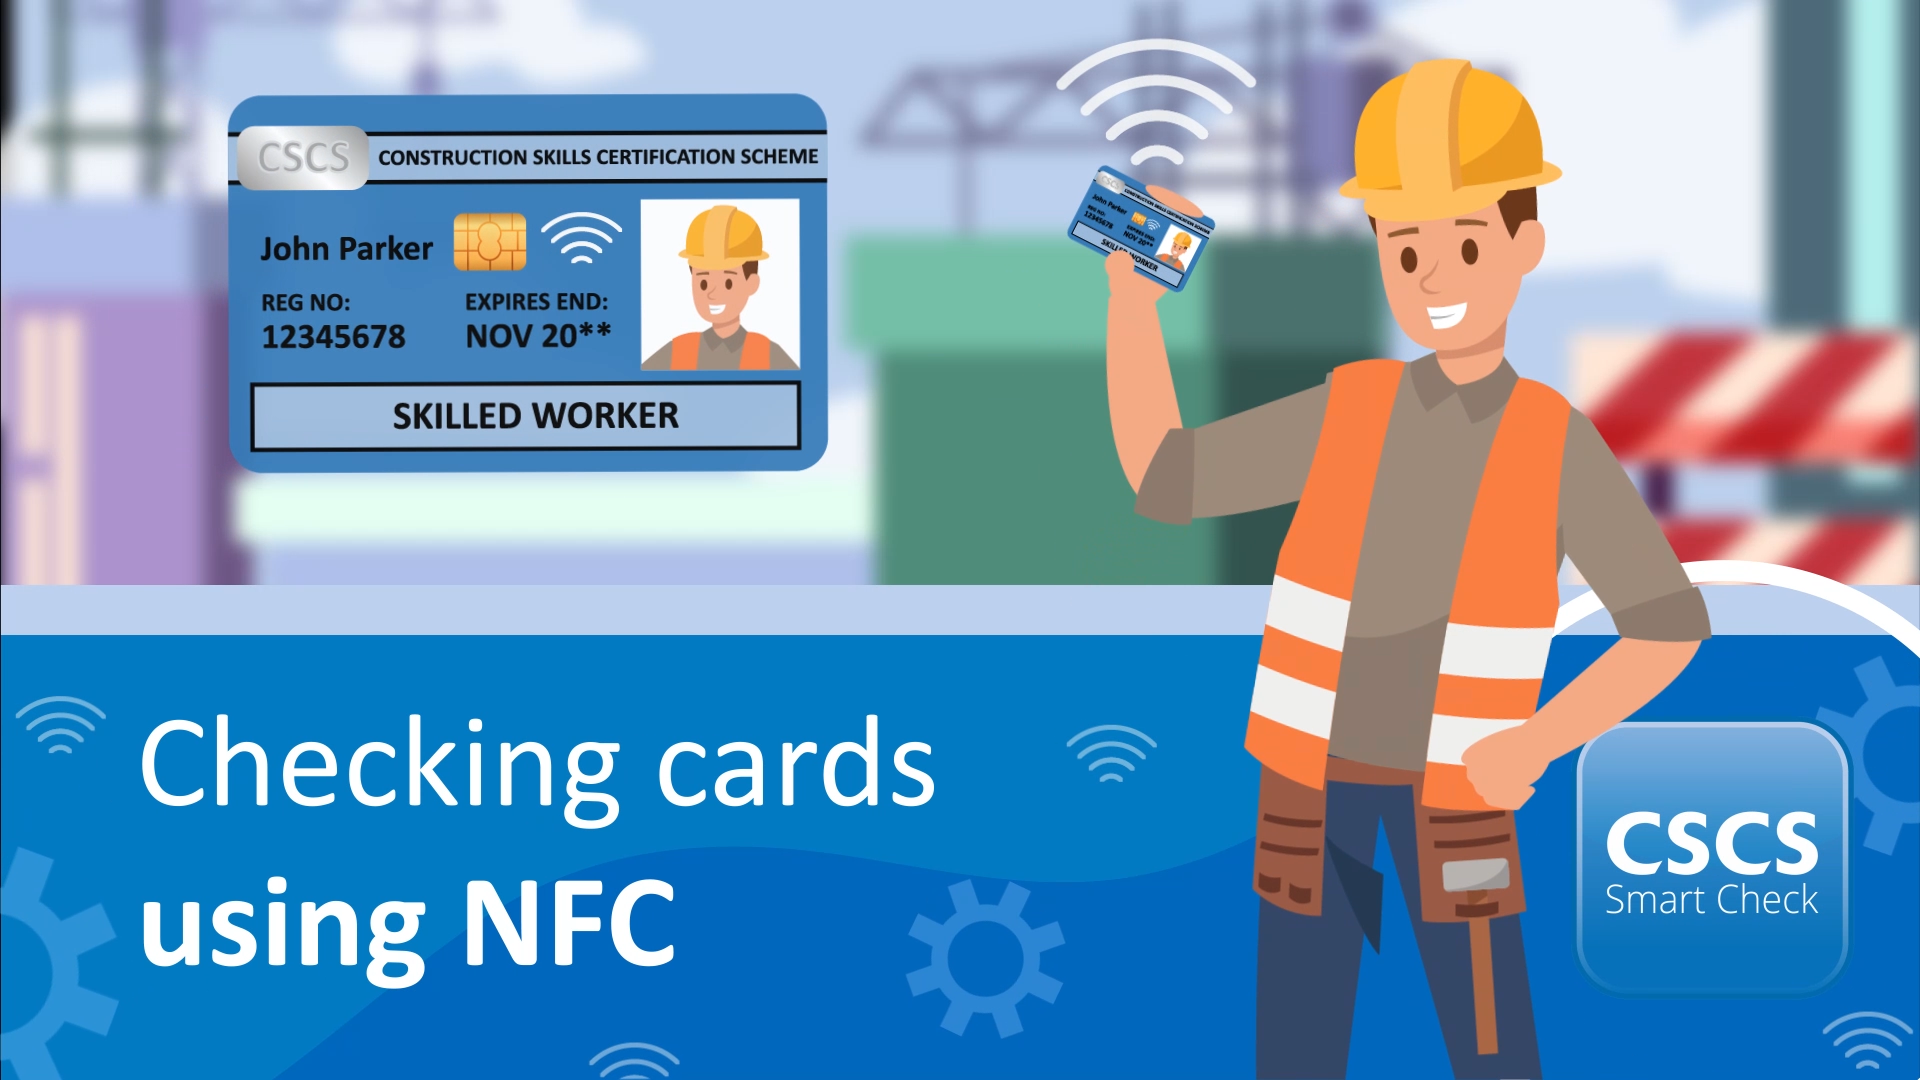 CSCS Smart Check | How to check a card using Contactless